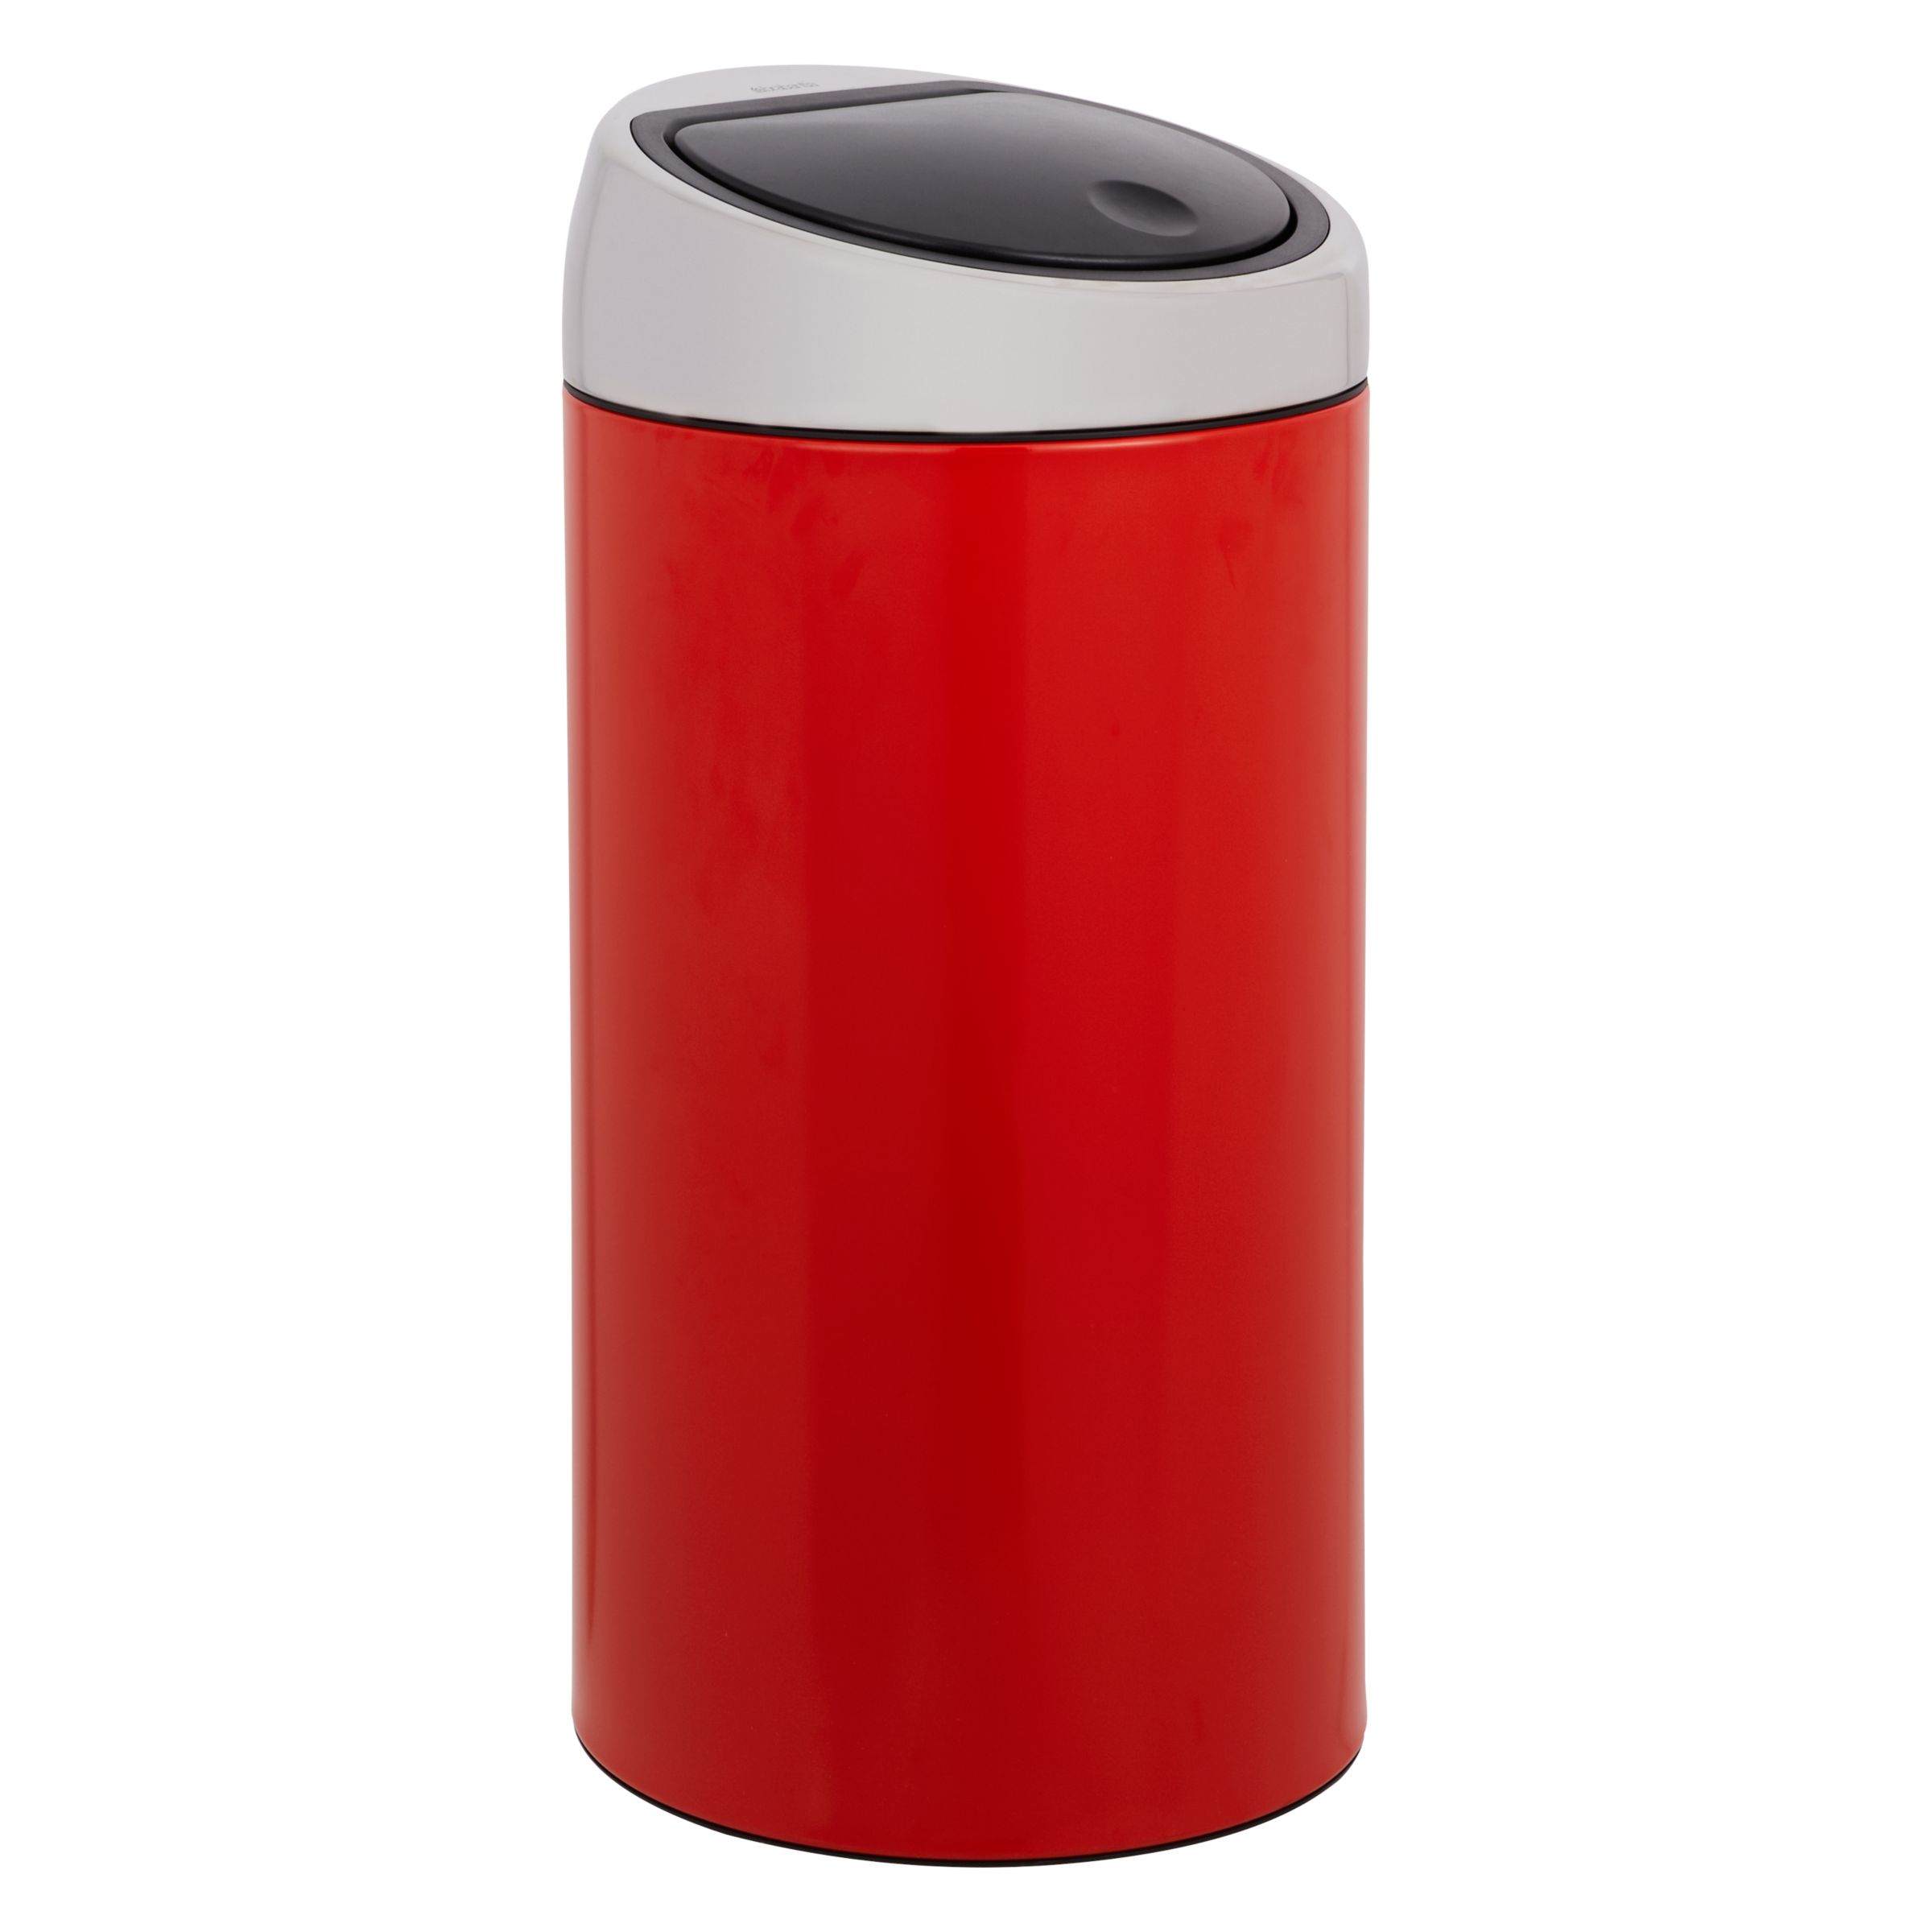 Brabantia Touch Bin Deluxe, 45L, Lipstick Red at JohnLewis